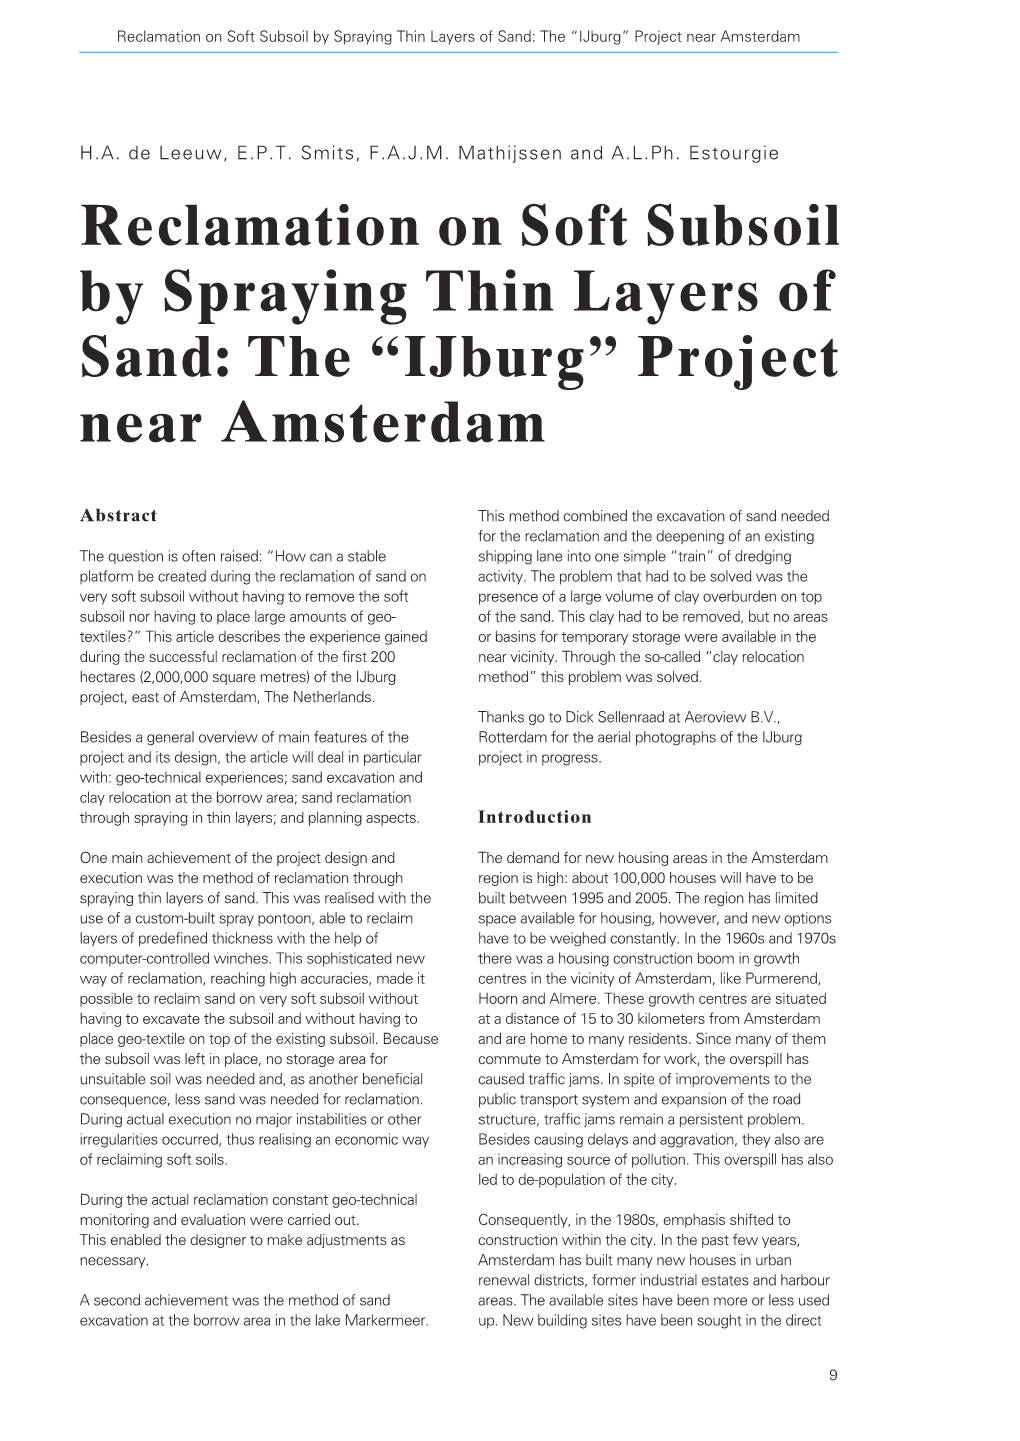 Reclamation on Soft Subsoil by Spraying Thin Layers of Sand: the “Ijburg” Project Near Amsterdam